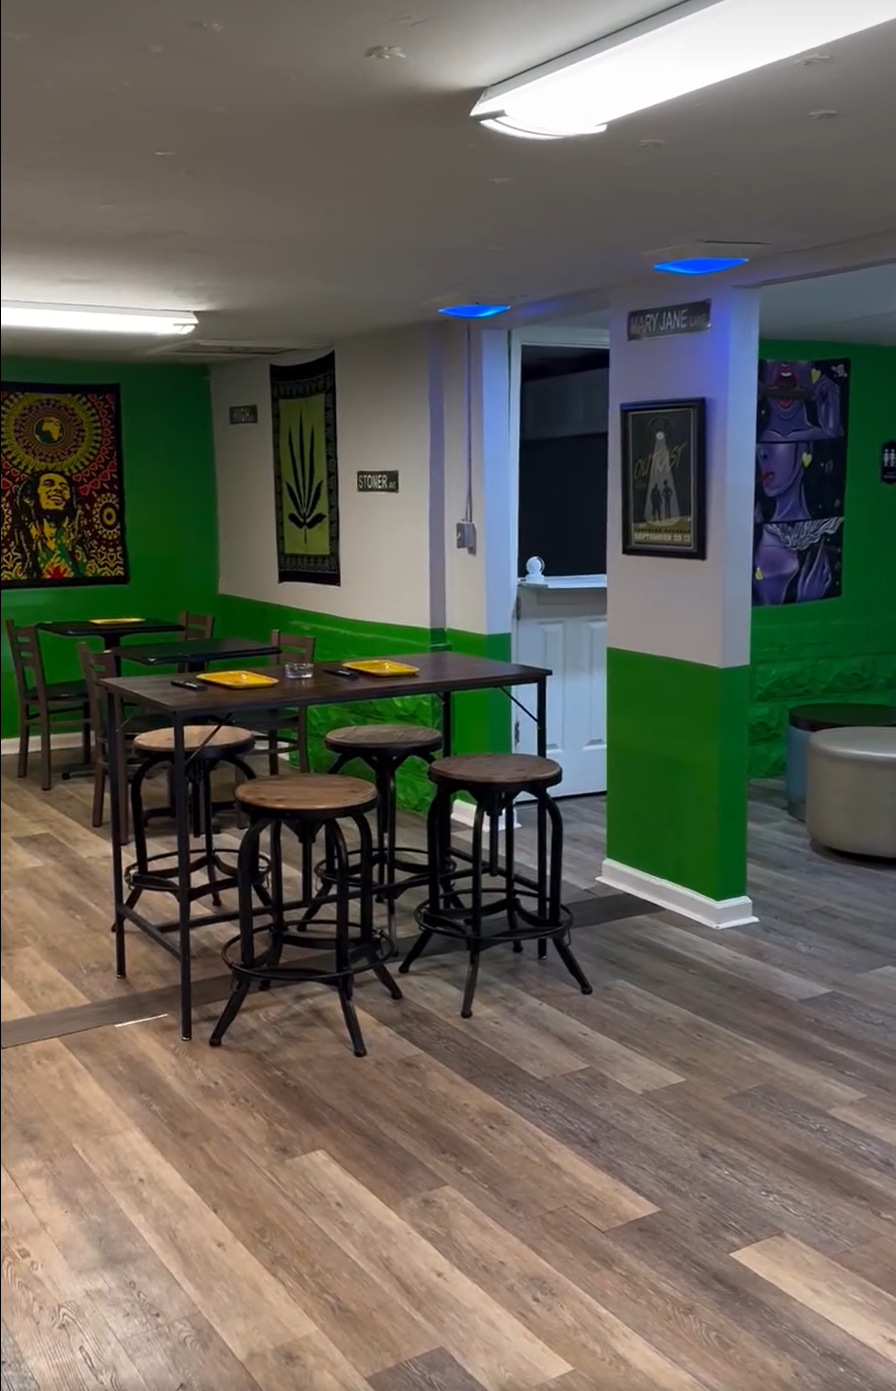 The Exotic Smoker Vape and Smoke Shop - Rental Venue 2 - Augusta event venue with wooden stools and tables on a wooden flooring